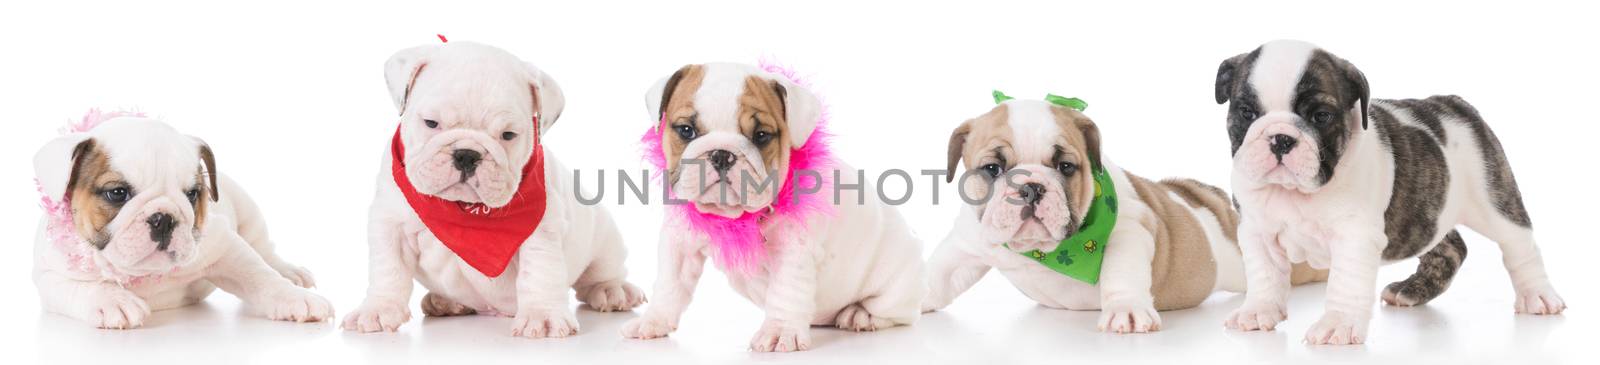 litter of bulldog puppies by willeecole123